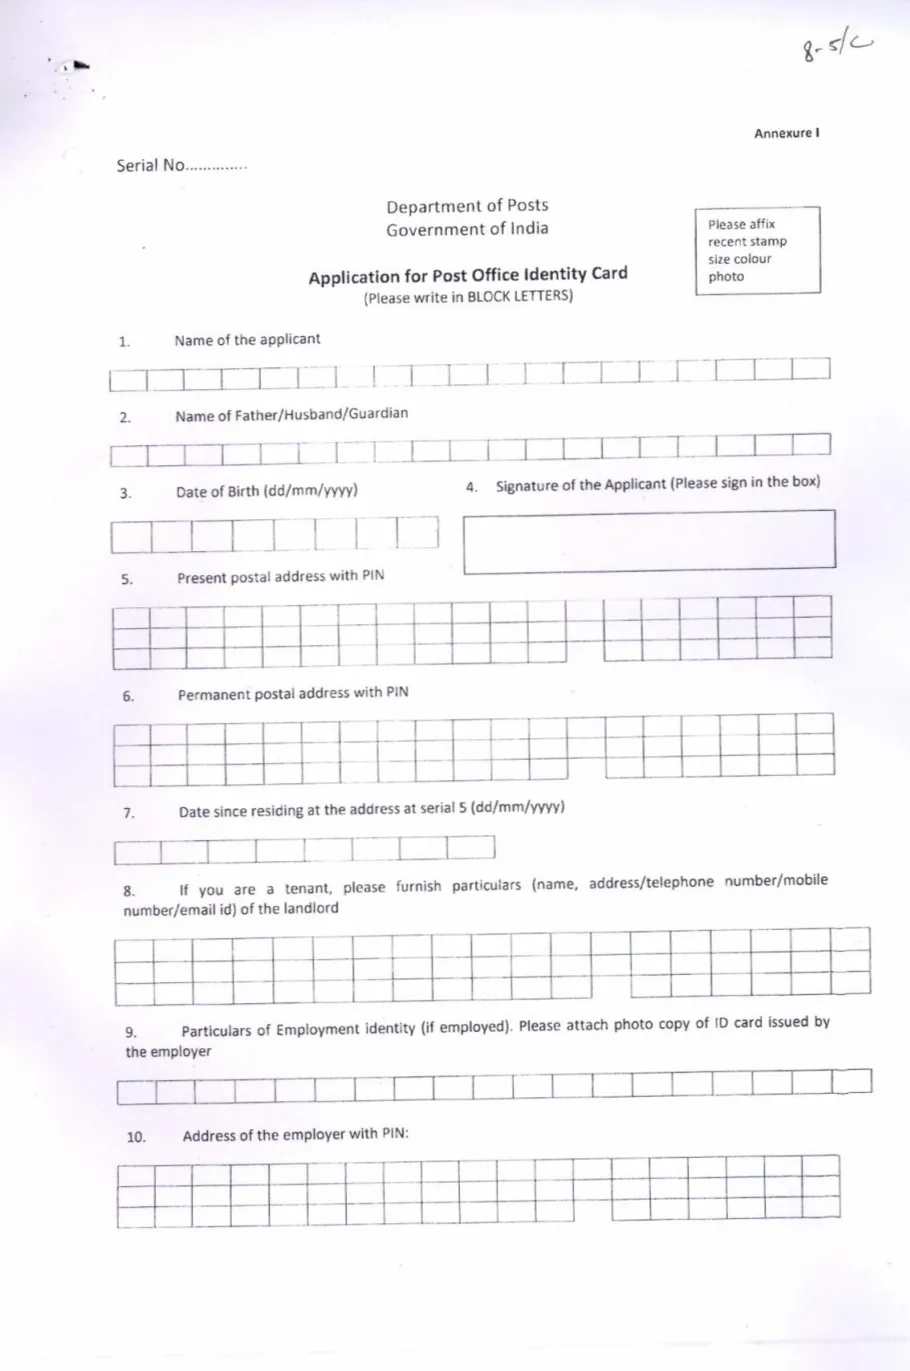 Post Office Identity Card Application form